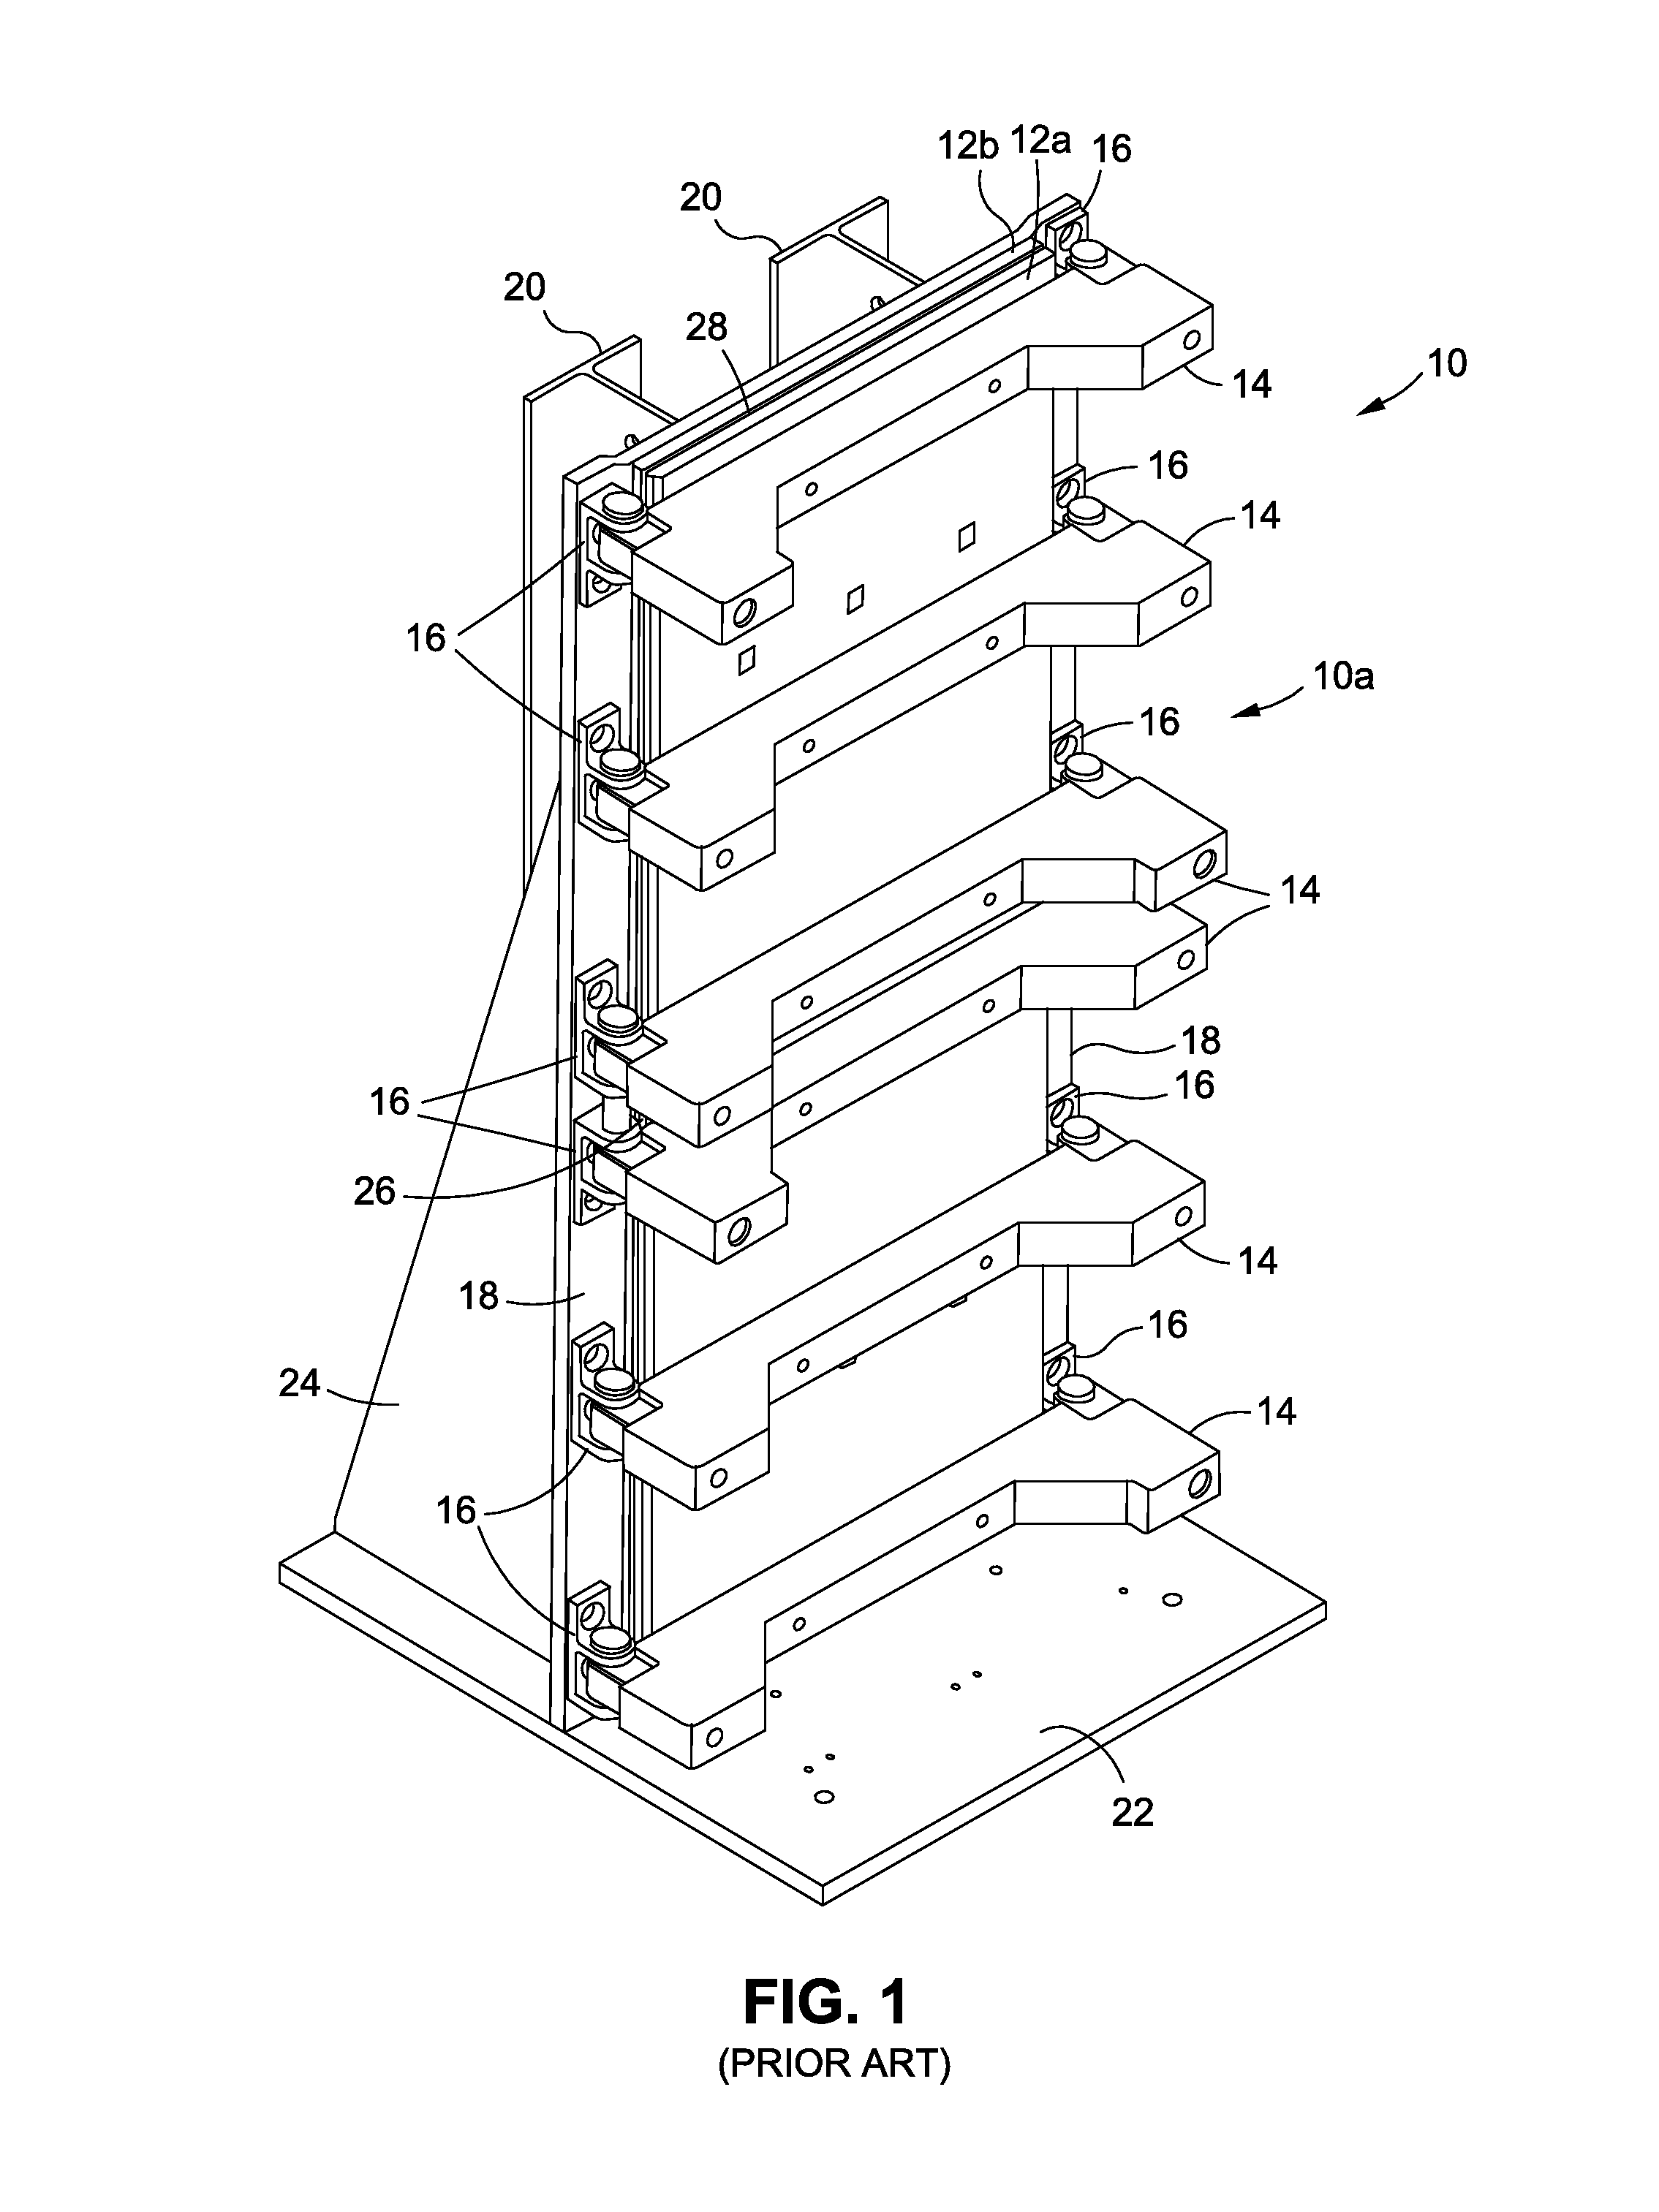 Apparatus, system and method for compression testing of test specimens